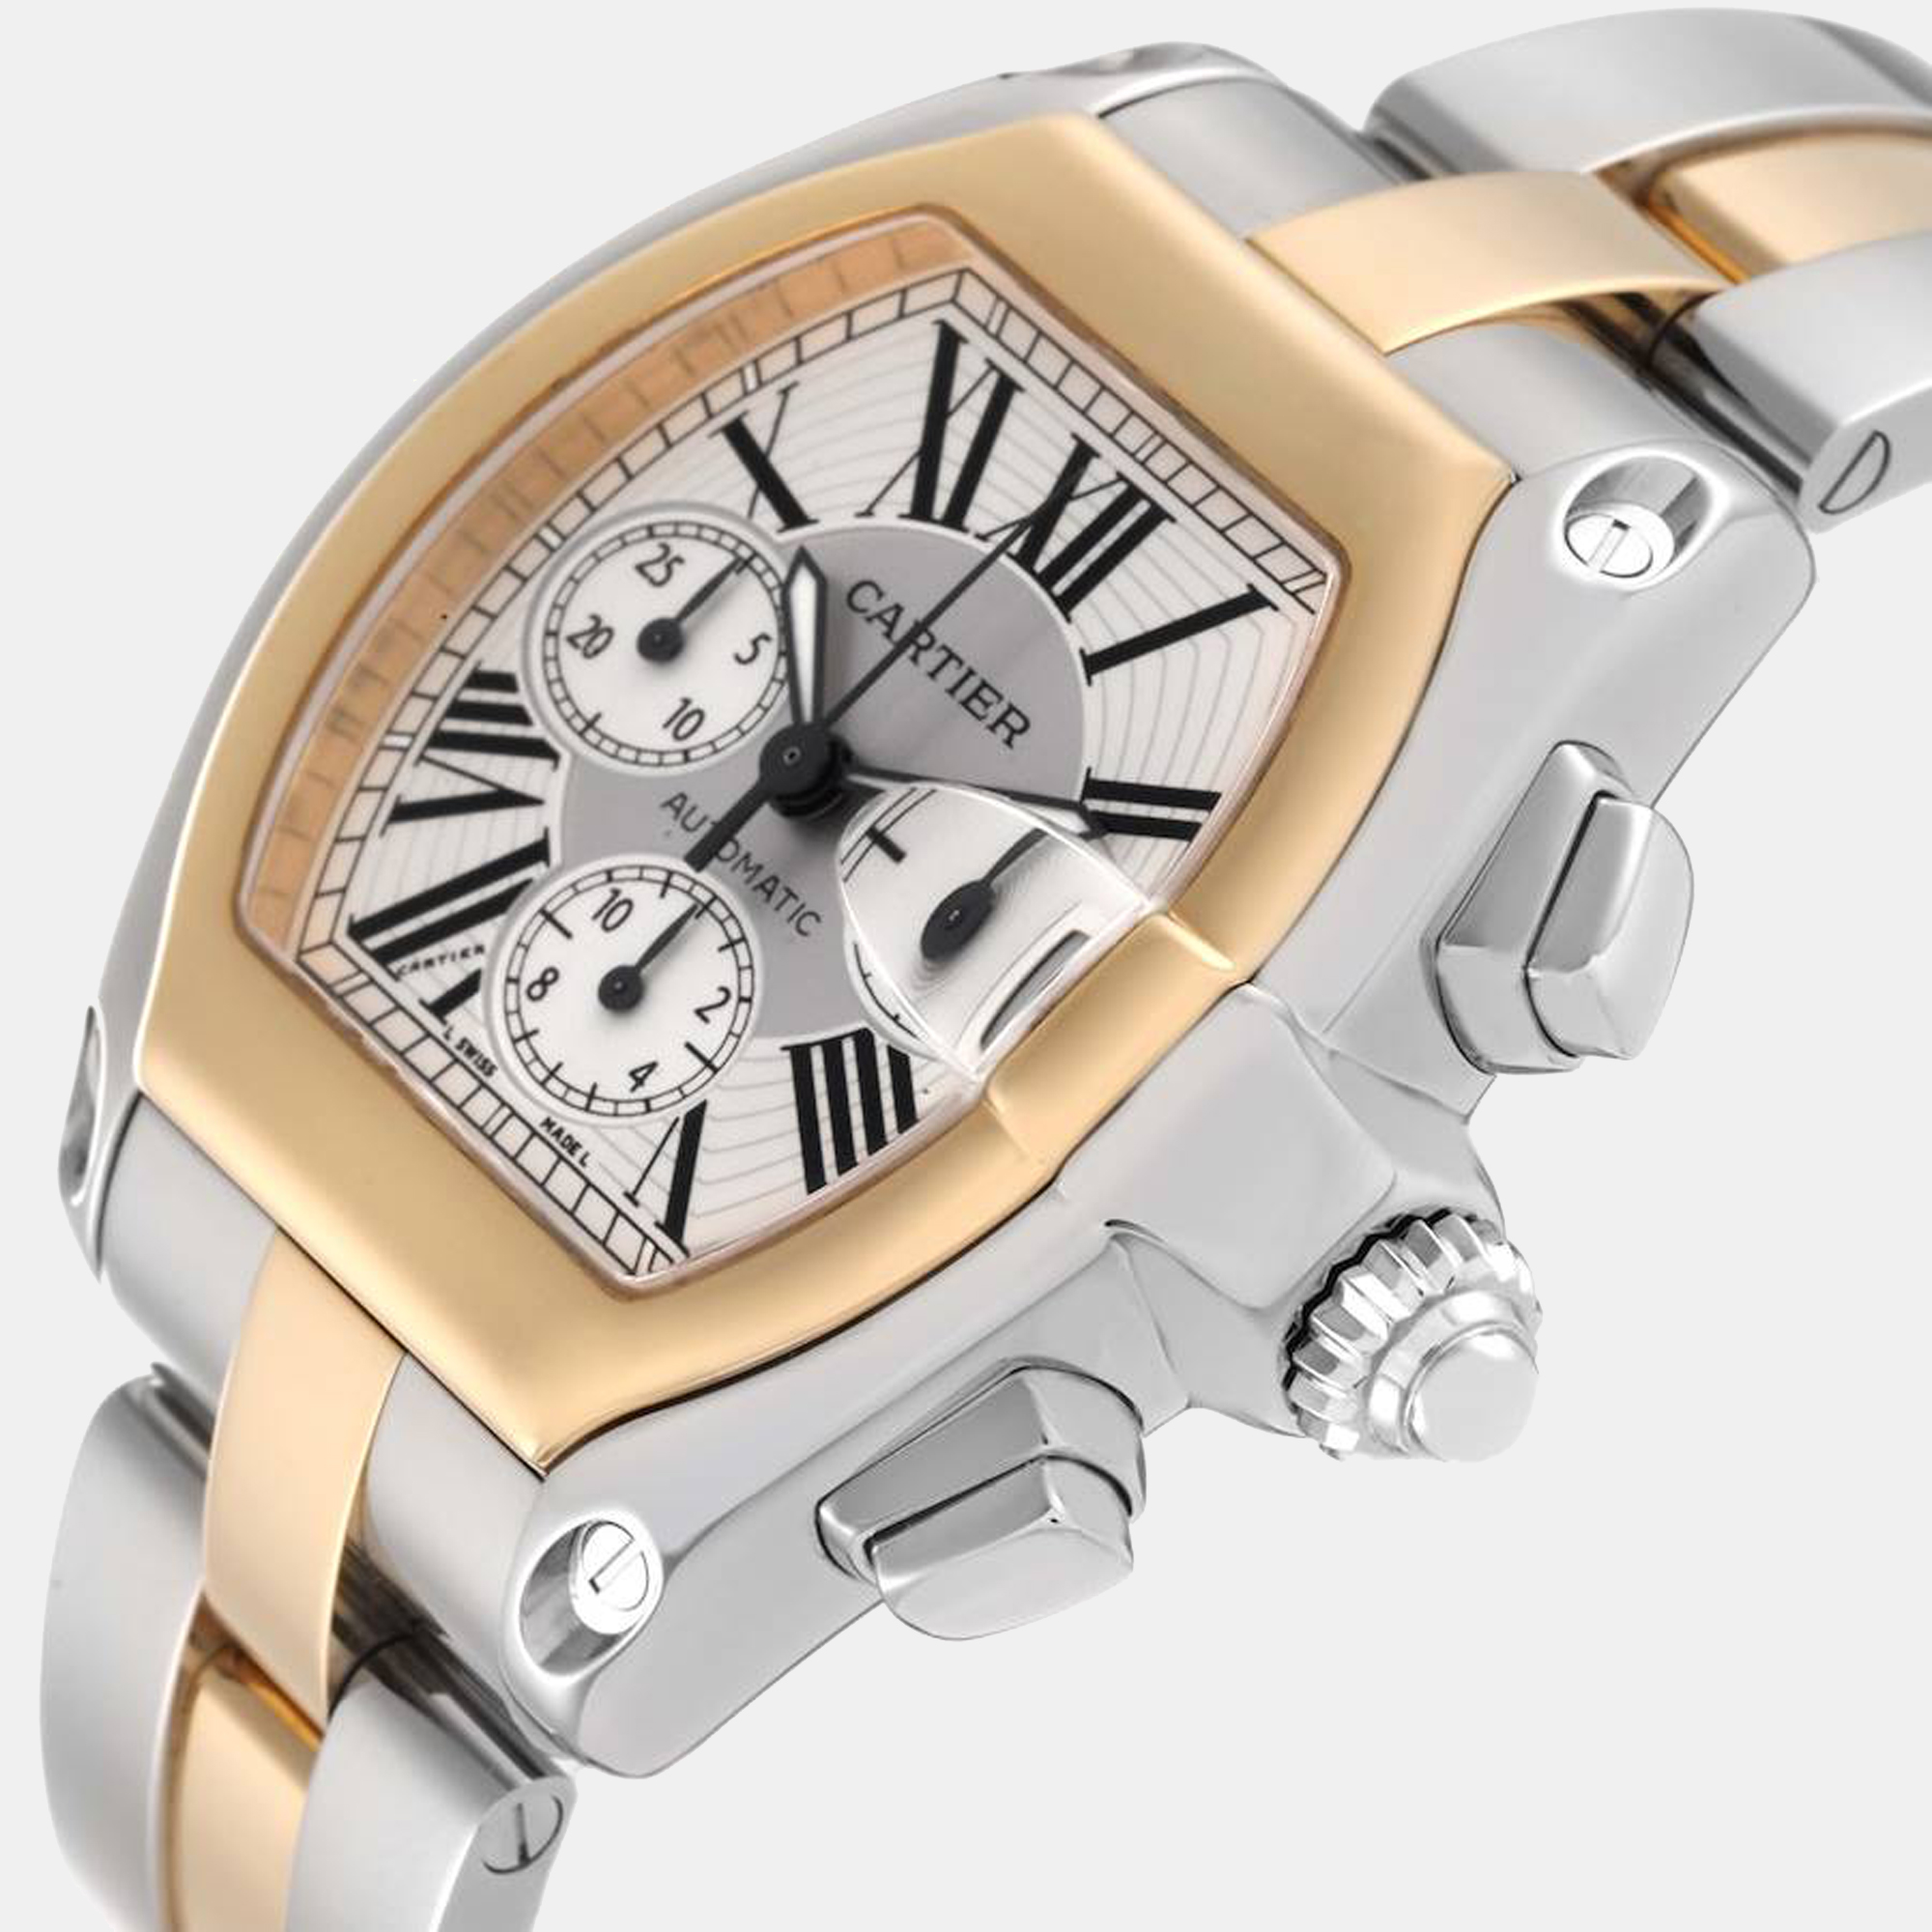 

Cartier Silver 18K Yellow Gold And Stainless Steel Roadster W62027Z1 Automatic Men's Wristwatch 43 mm